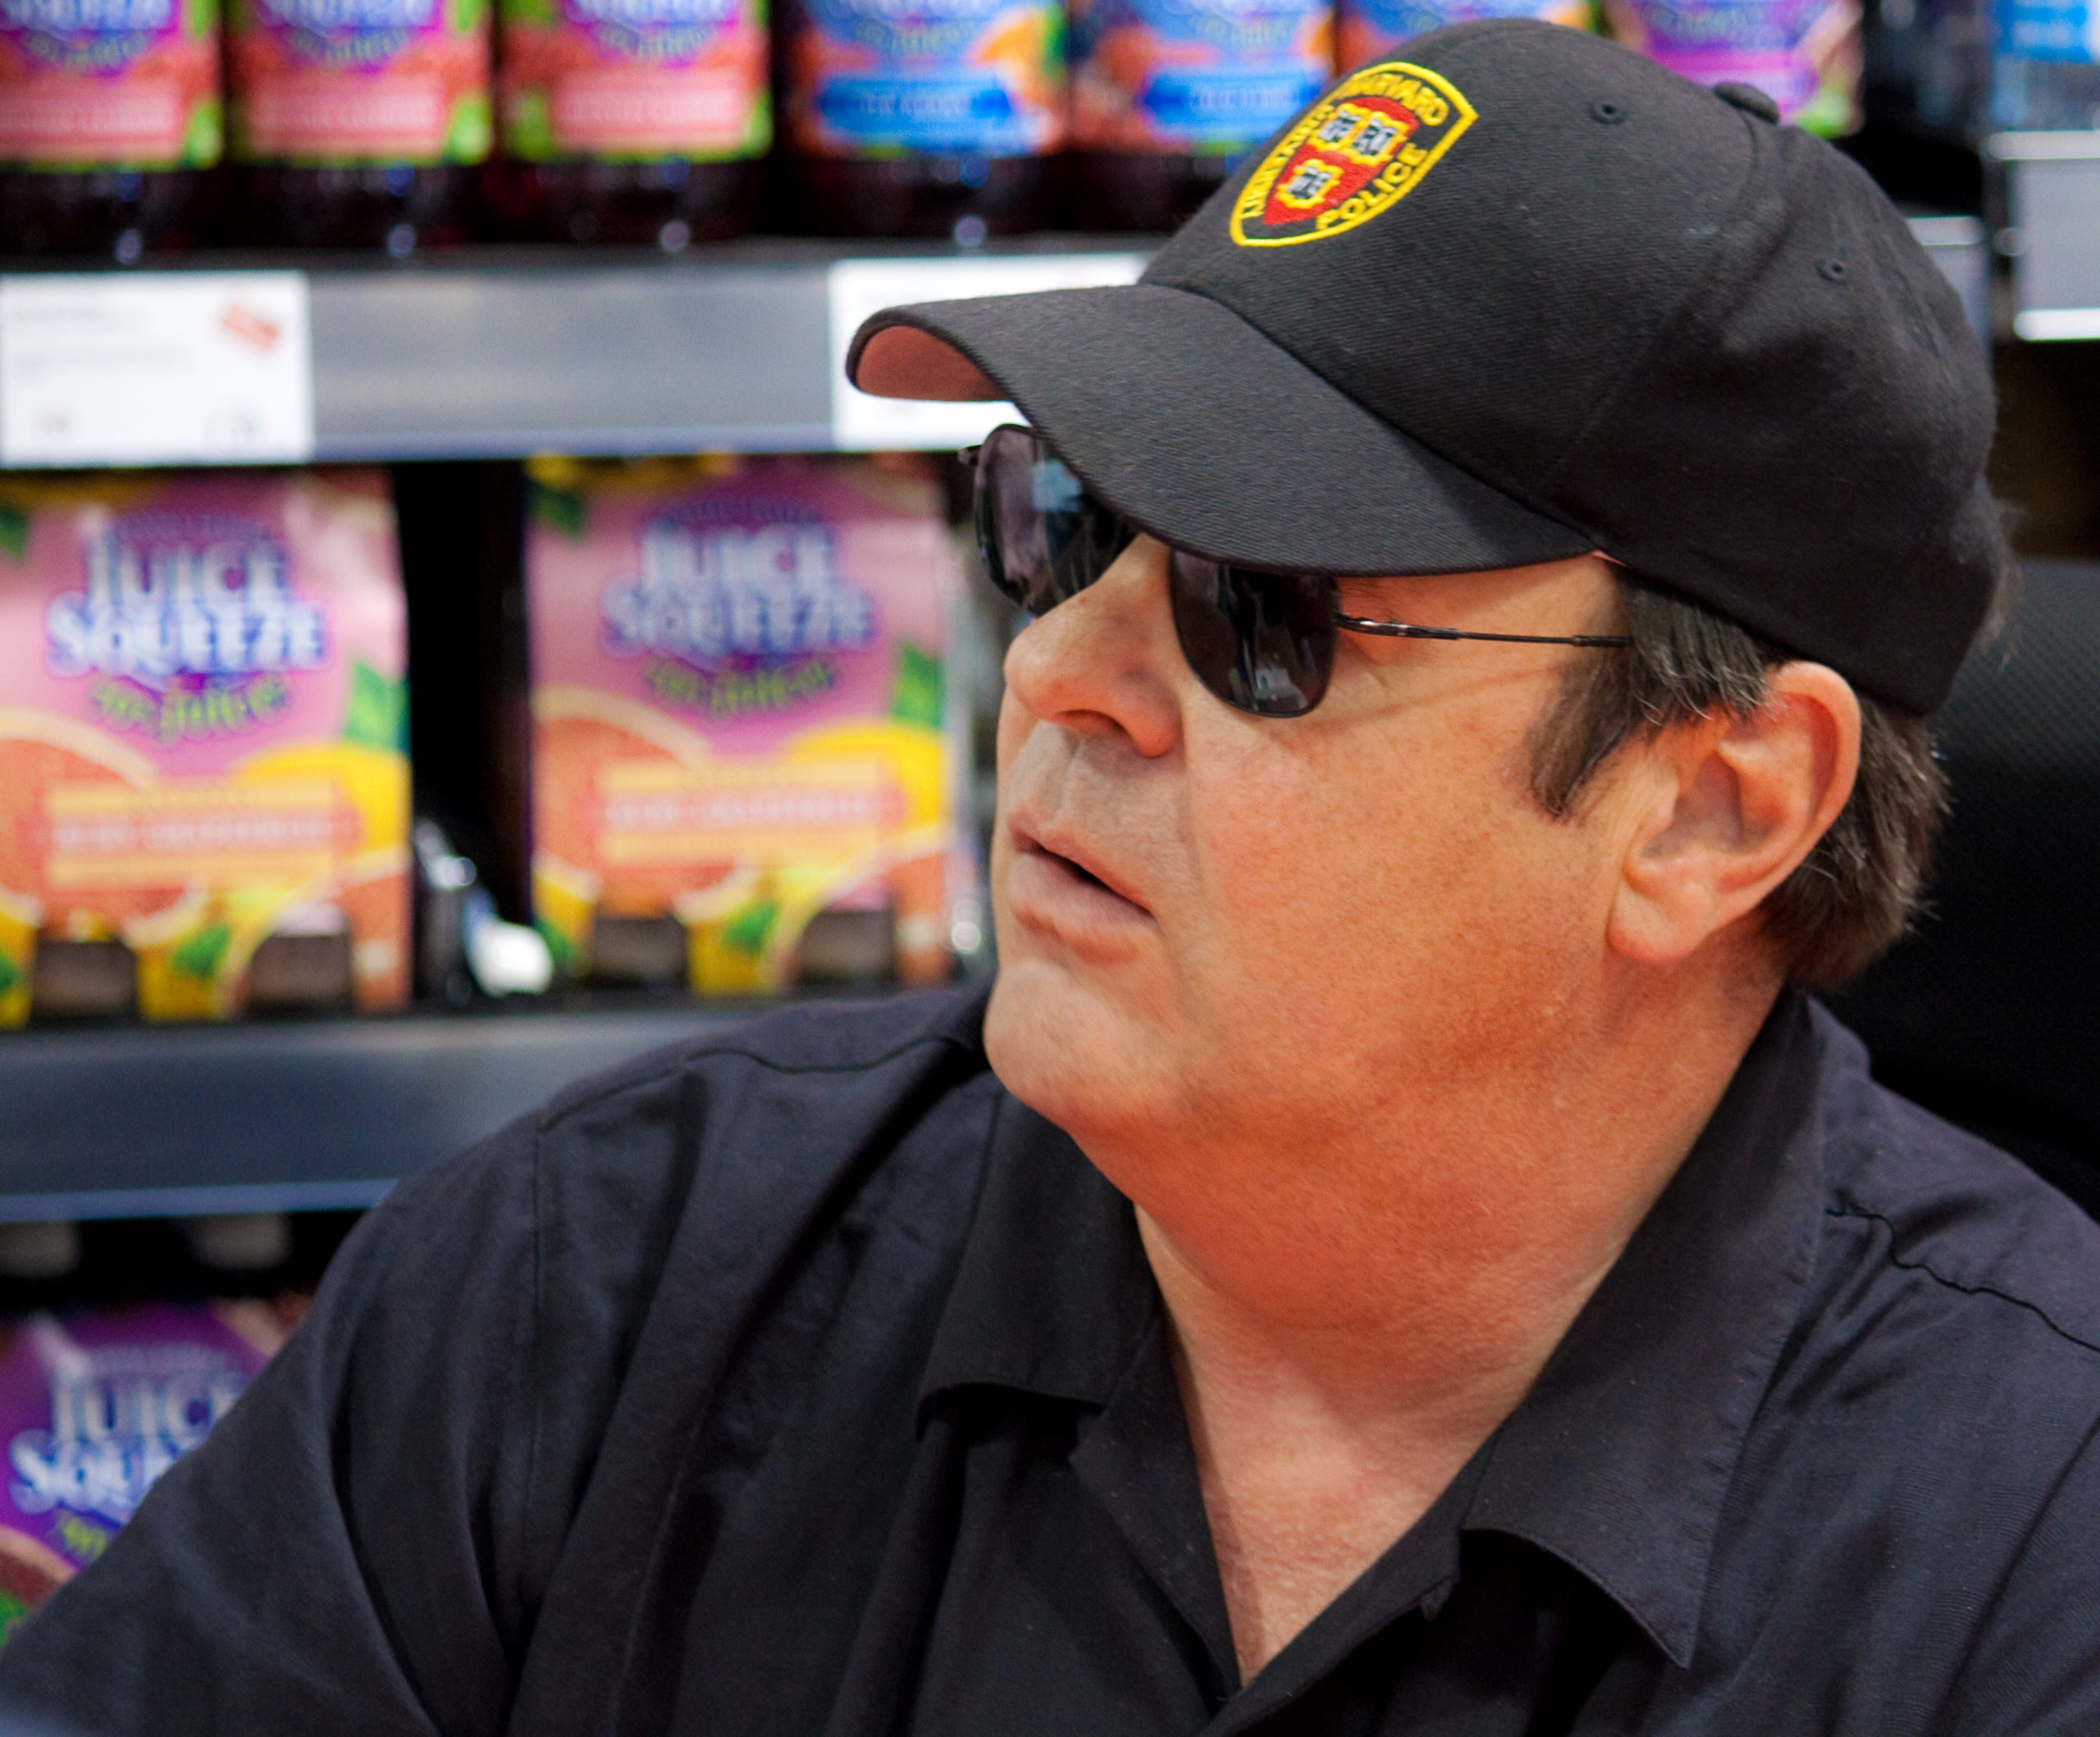 The actor Dan Aykroyd is sitting in a record shop. He is wearing a baseball cap, some sunglasses and a dark polo shirt.